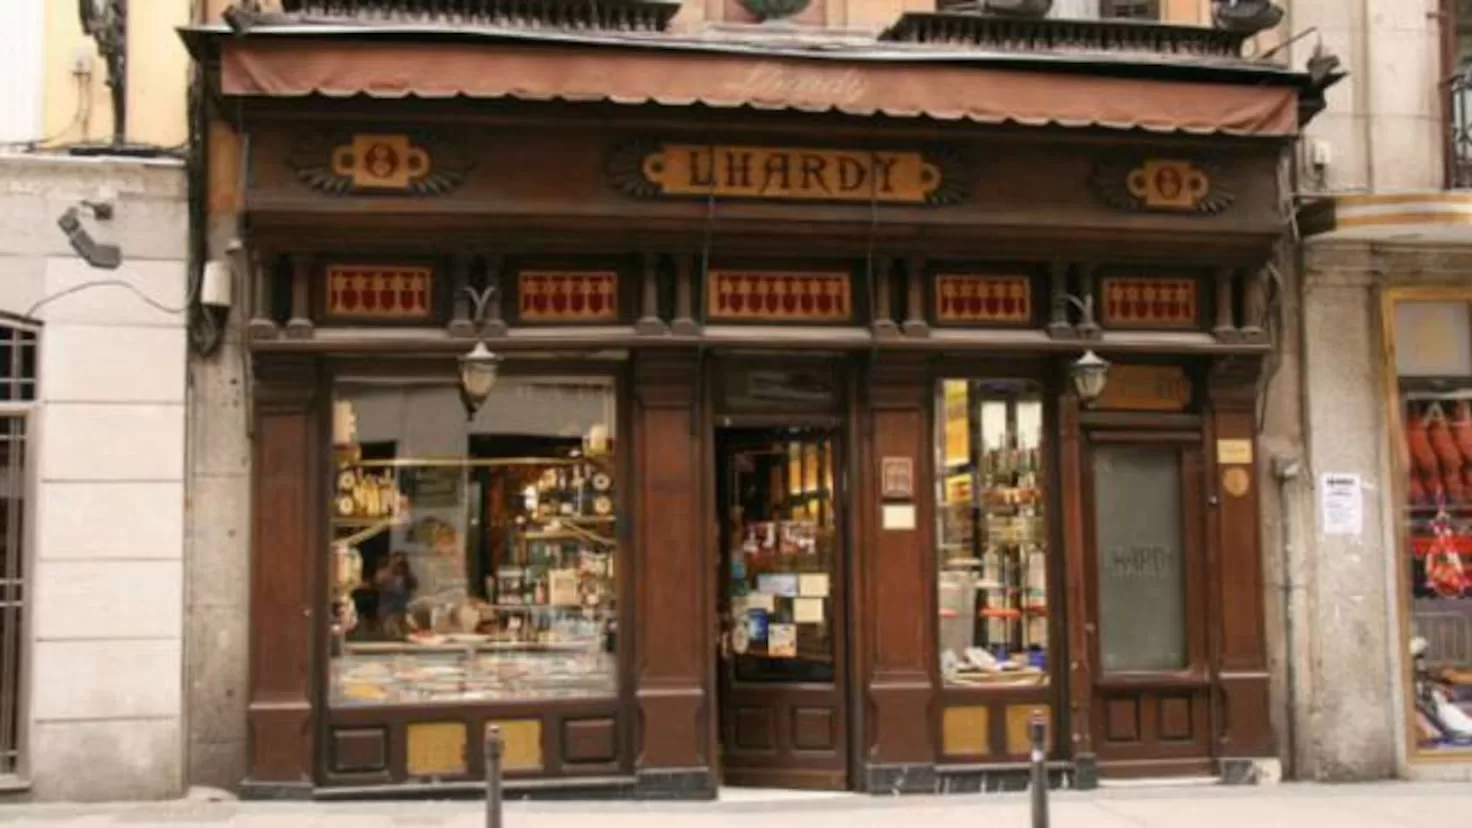 Lhardy, the legendary restaurant that will serve Almeida and Urquijo's wedding: how much does it cost and what does it eat?
